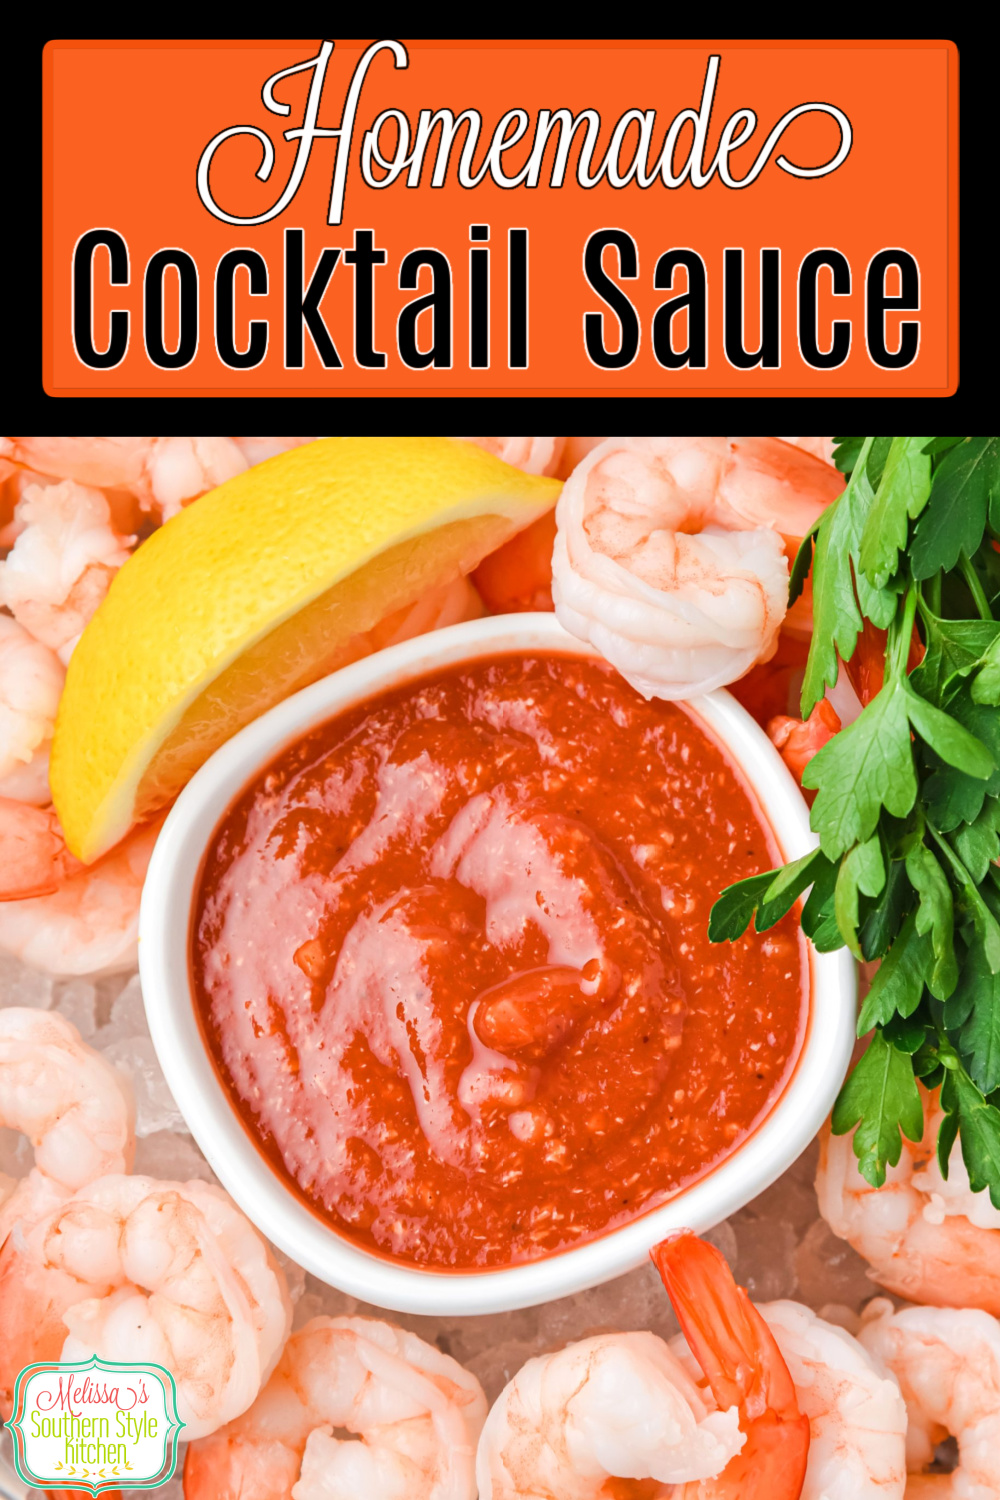 This homemade Cocktail Sauce recipe is made with fresh ingredients and guaranteed to make the perfect addition to your seafood menu! #cocktailsauce #easycoctailsaucerecipe #condimentrecipes #condiments #chilisauce via @melissasssk